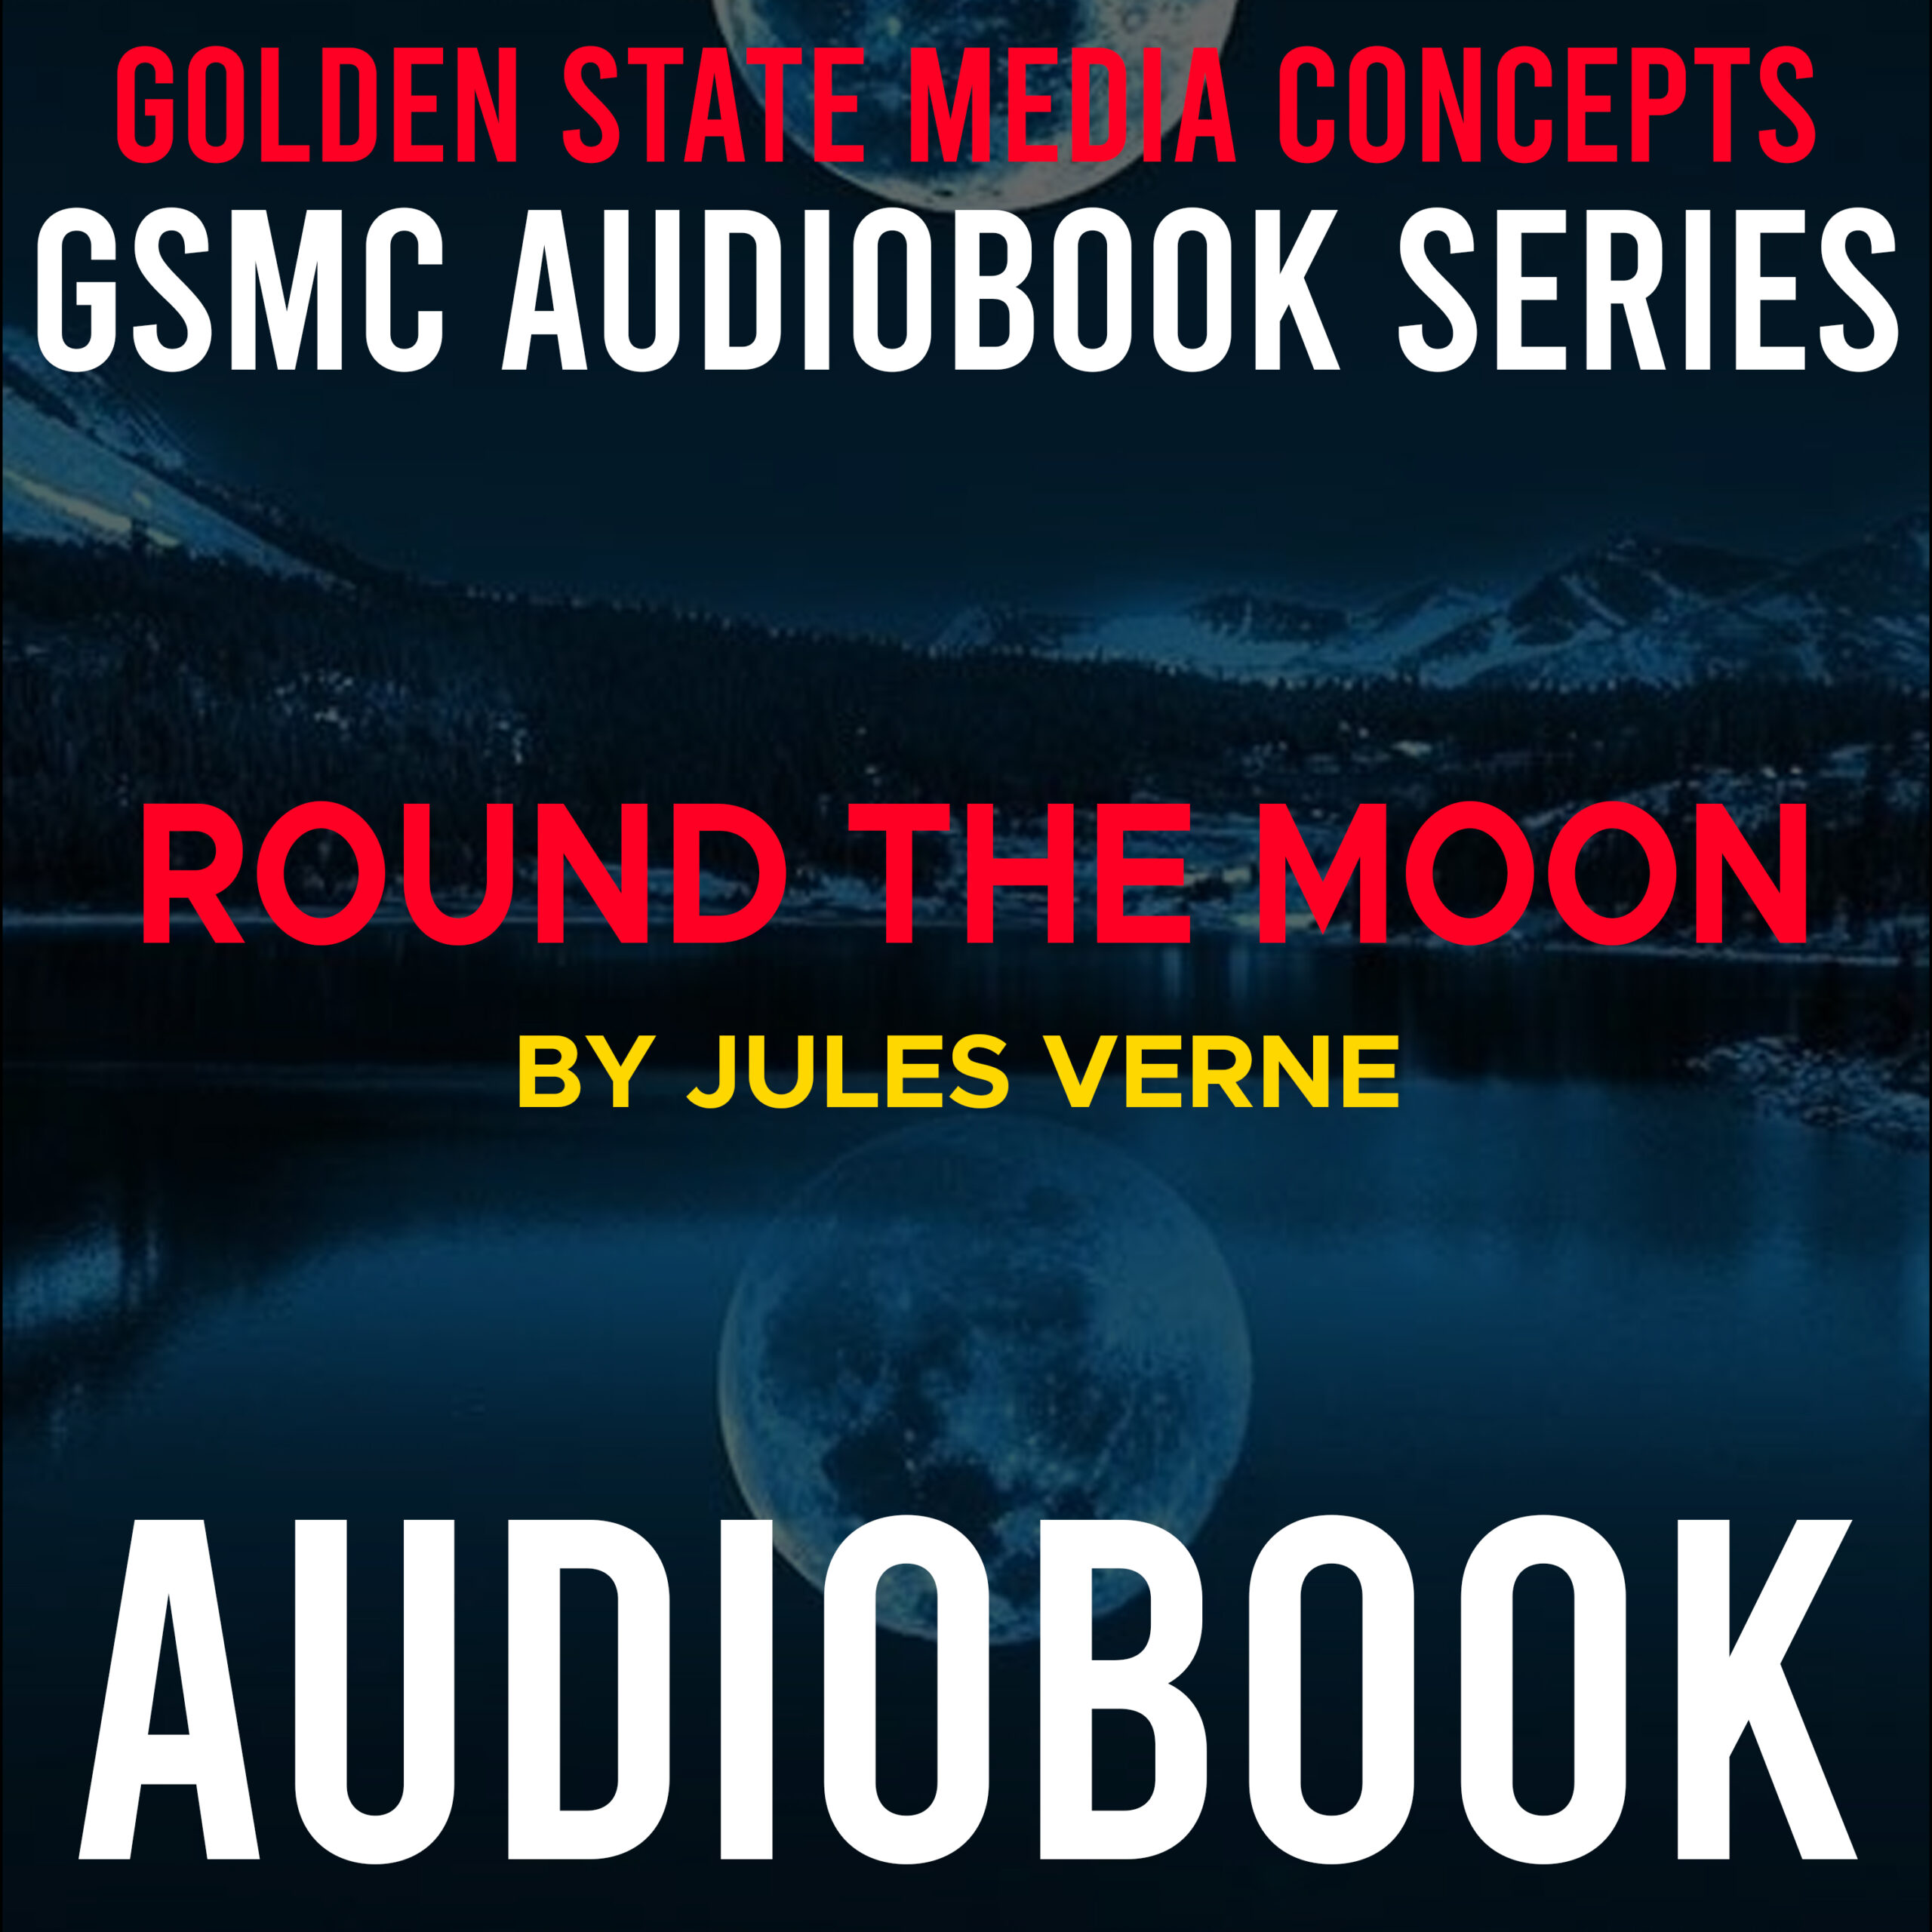 GSMC Audiobook Series: Round the Moon by Jules Verne